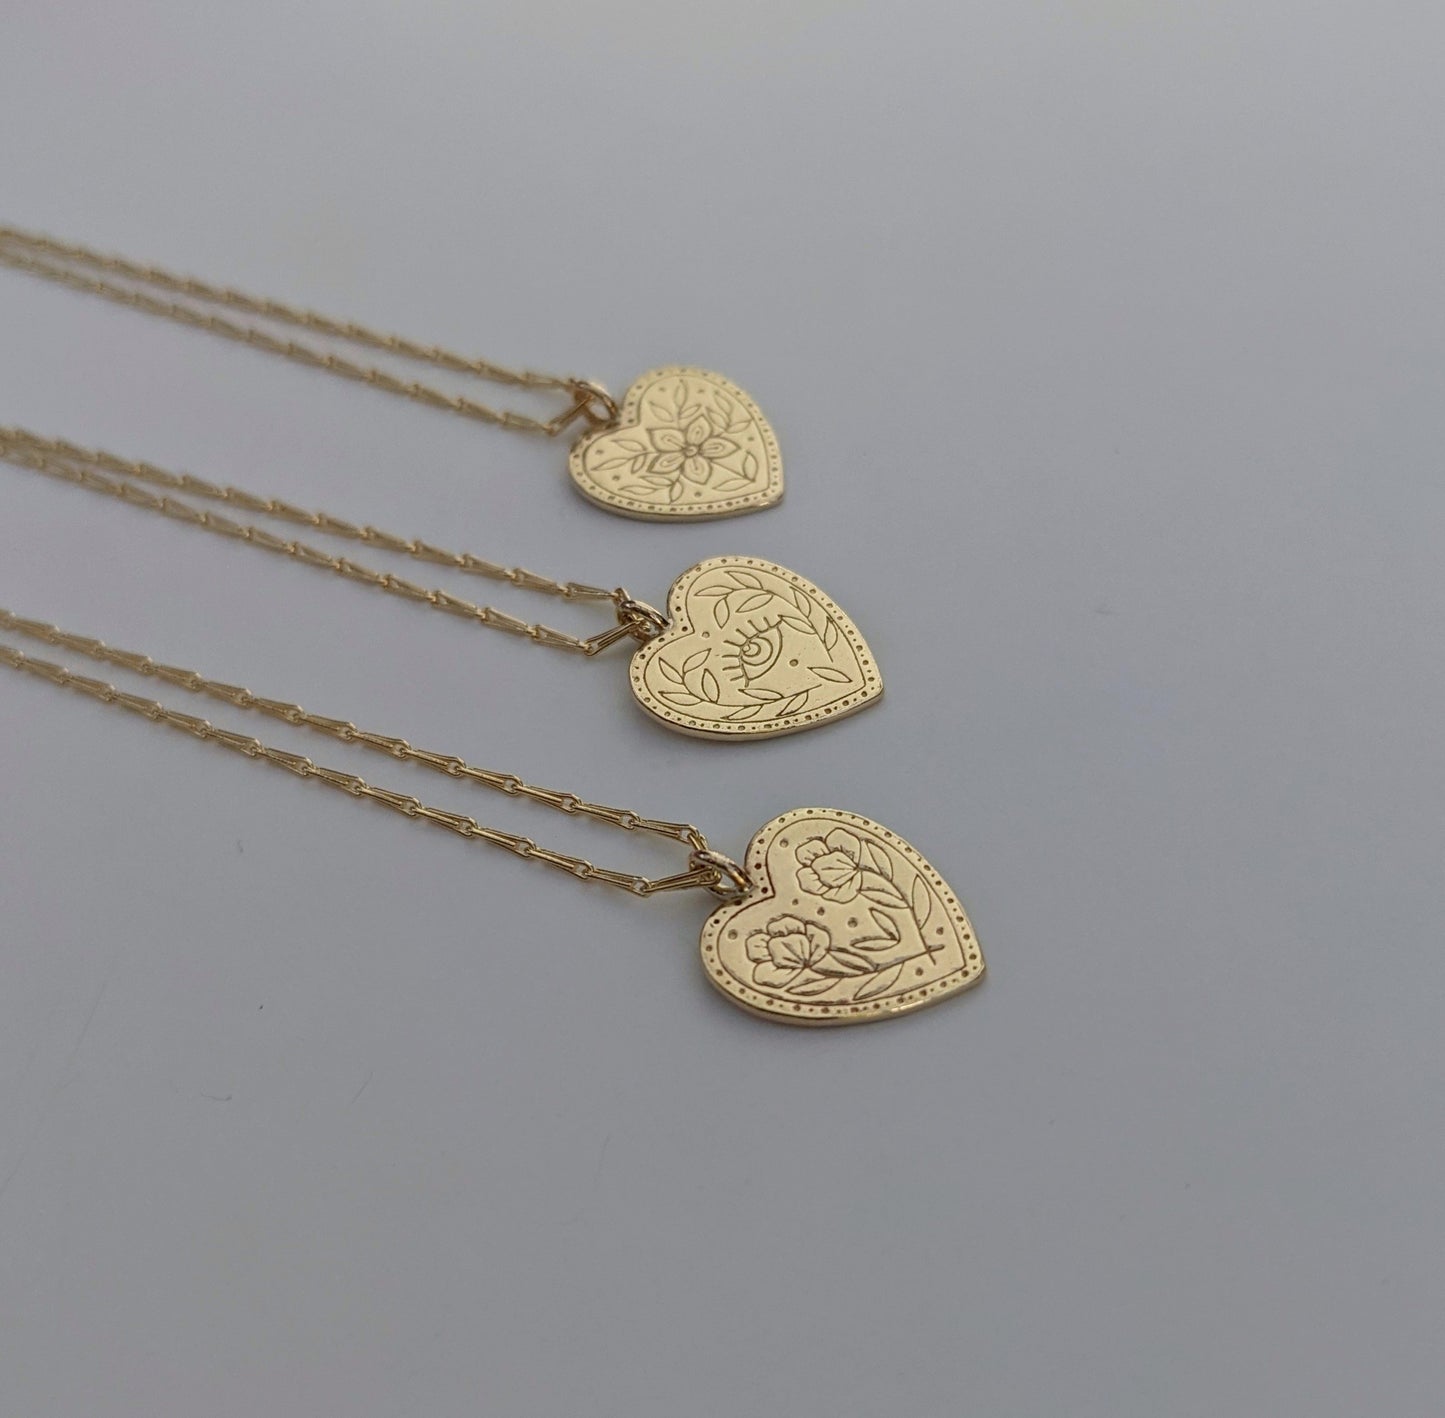 Engraved Heart Necklaces